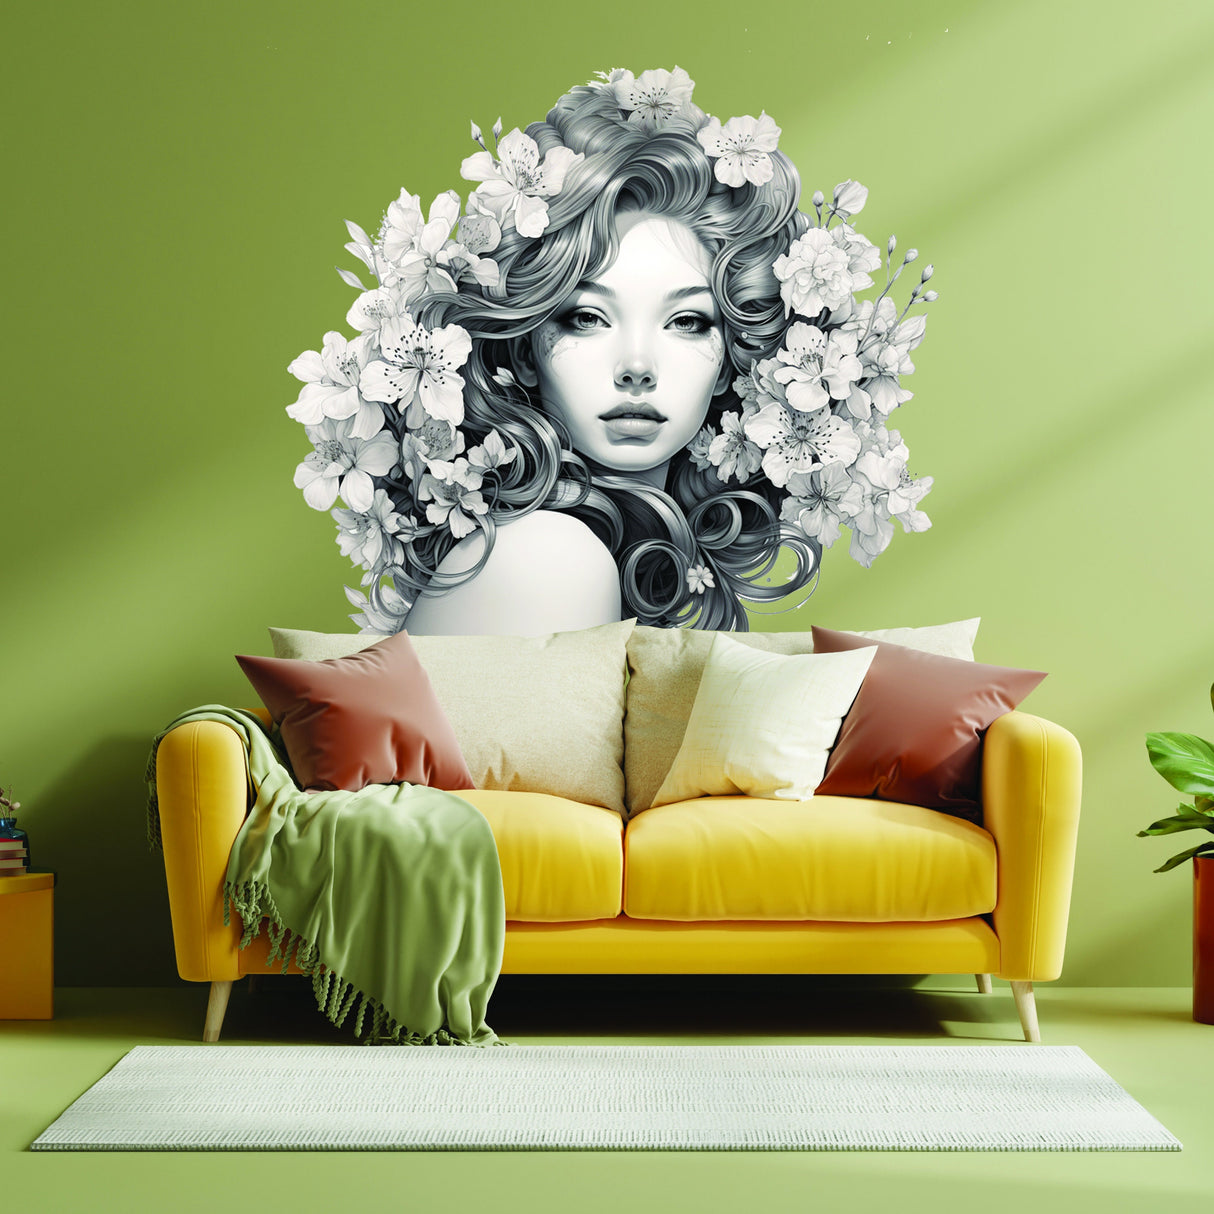 Elegant Woman with Floral Mind Decal - Apartment-Friendly Vinyl Wall Art Sticker - Removable Bloom Head Mural - Interior Decor